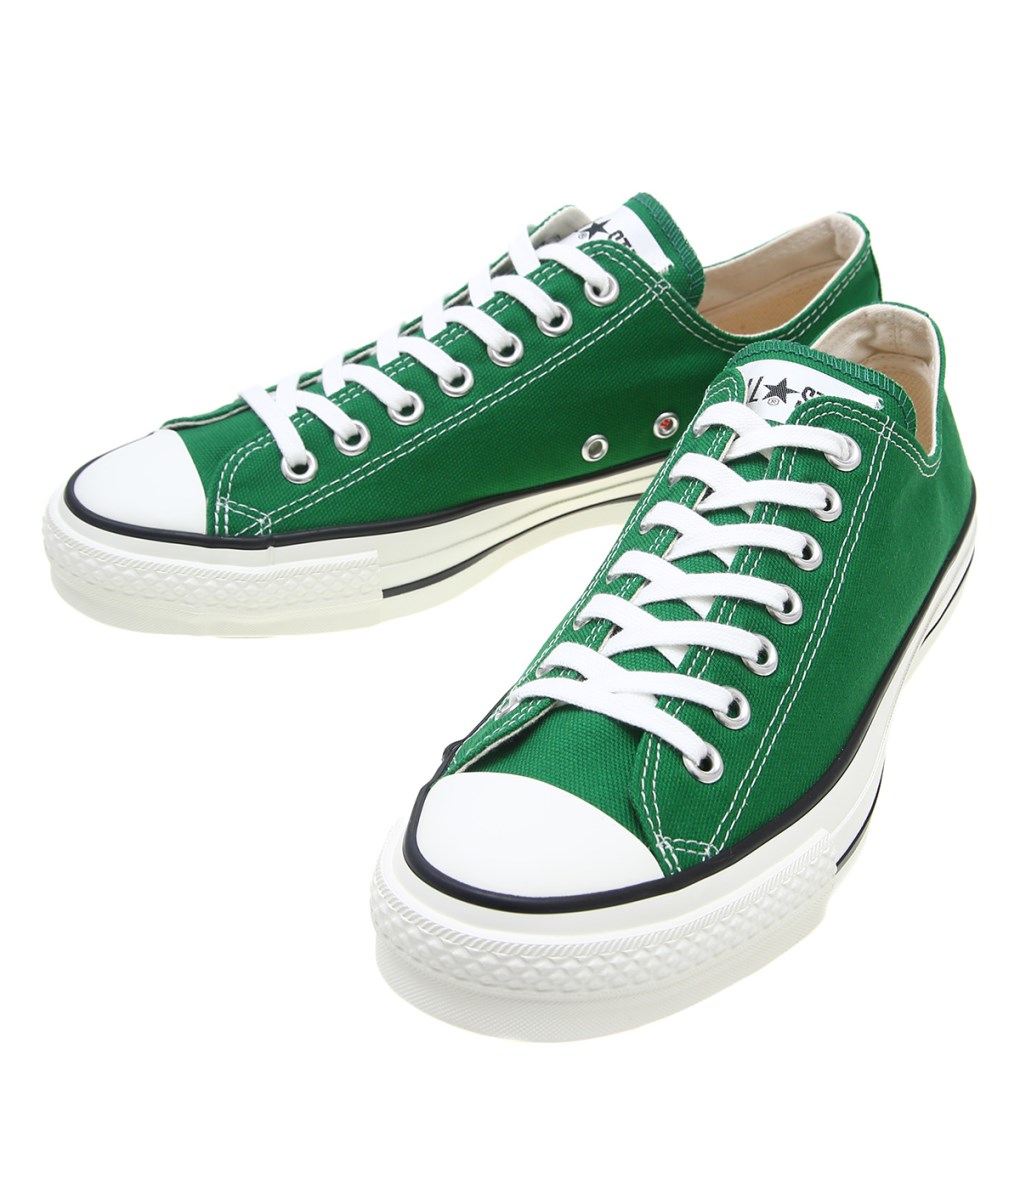 converse all star shoes green